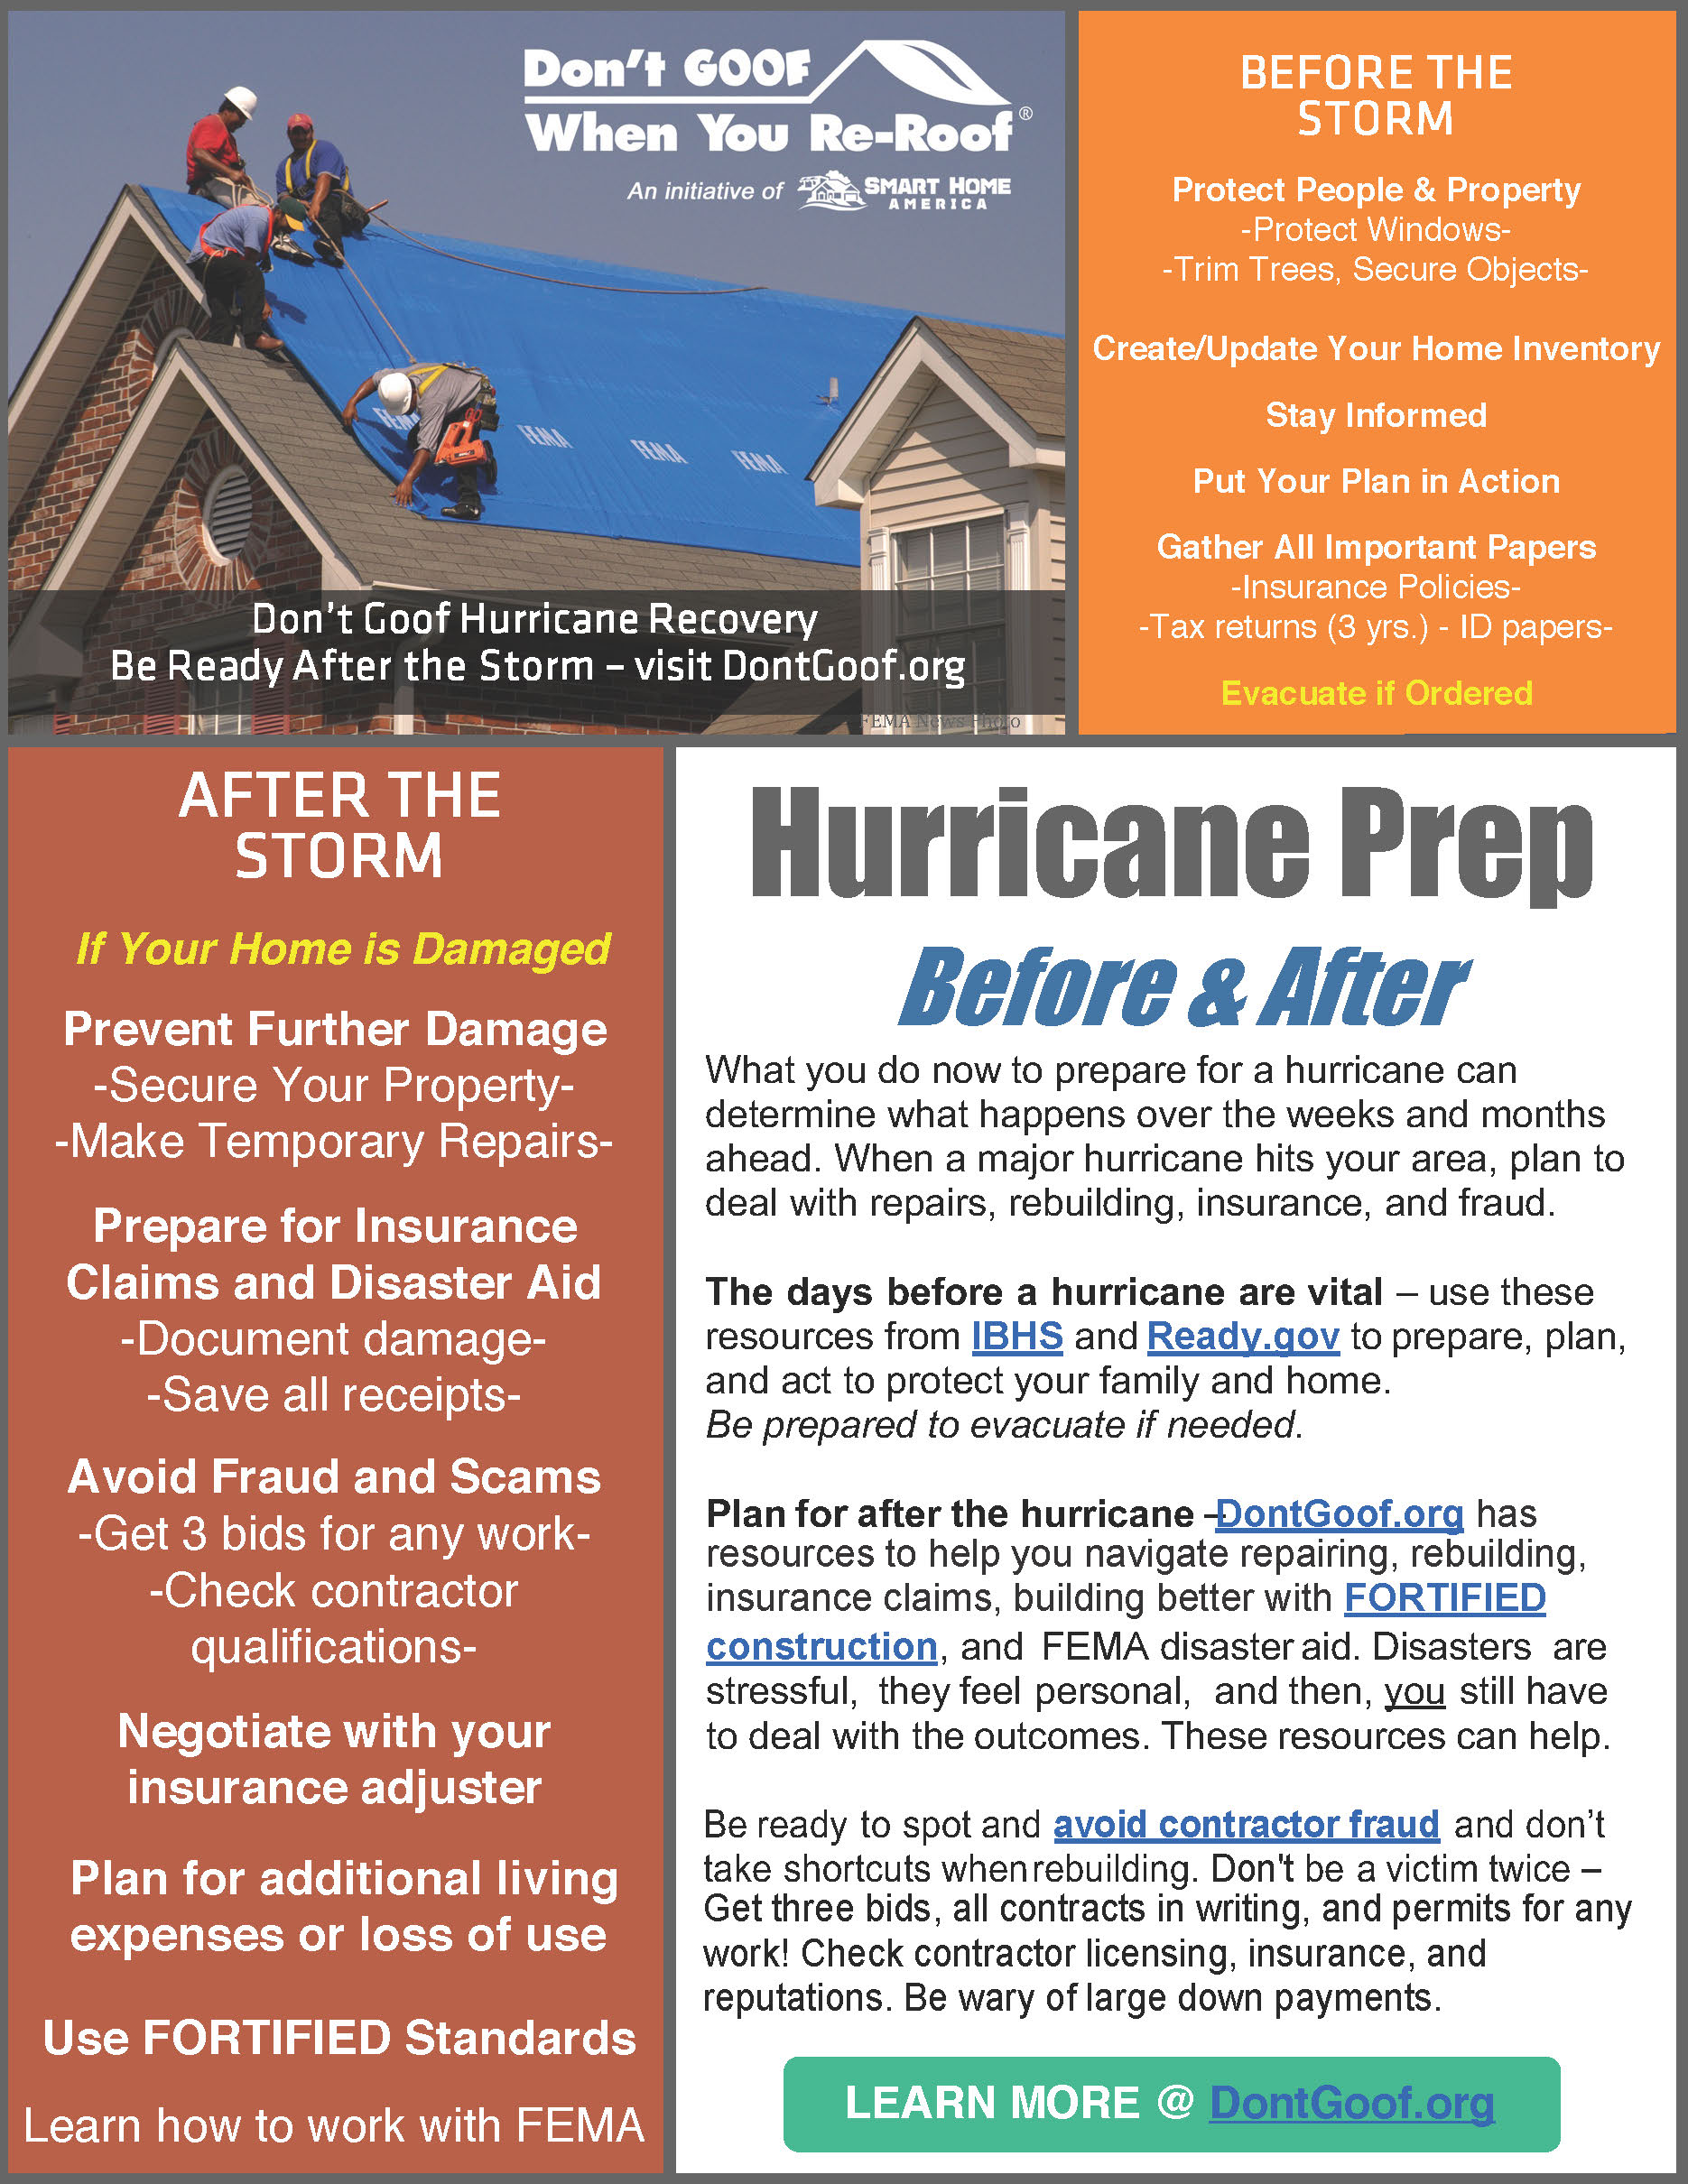 Don’t Goof Hurricane Recovery. Be Ready After the Storm – visit DontGoof.org What you do now to prepare for a hurricane can determine what happens over the weeks and months ahead. When a major hurricane hits your area, plan to deal with repairs, rebuilding, insurance, and fraud.